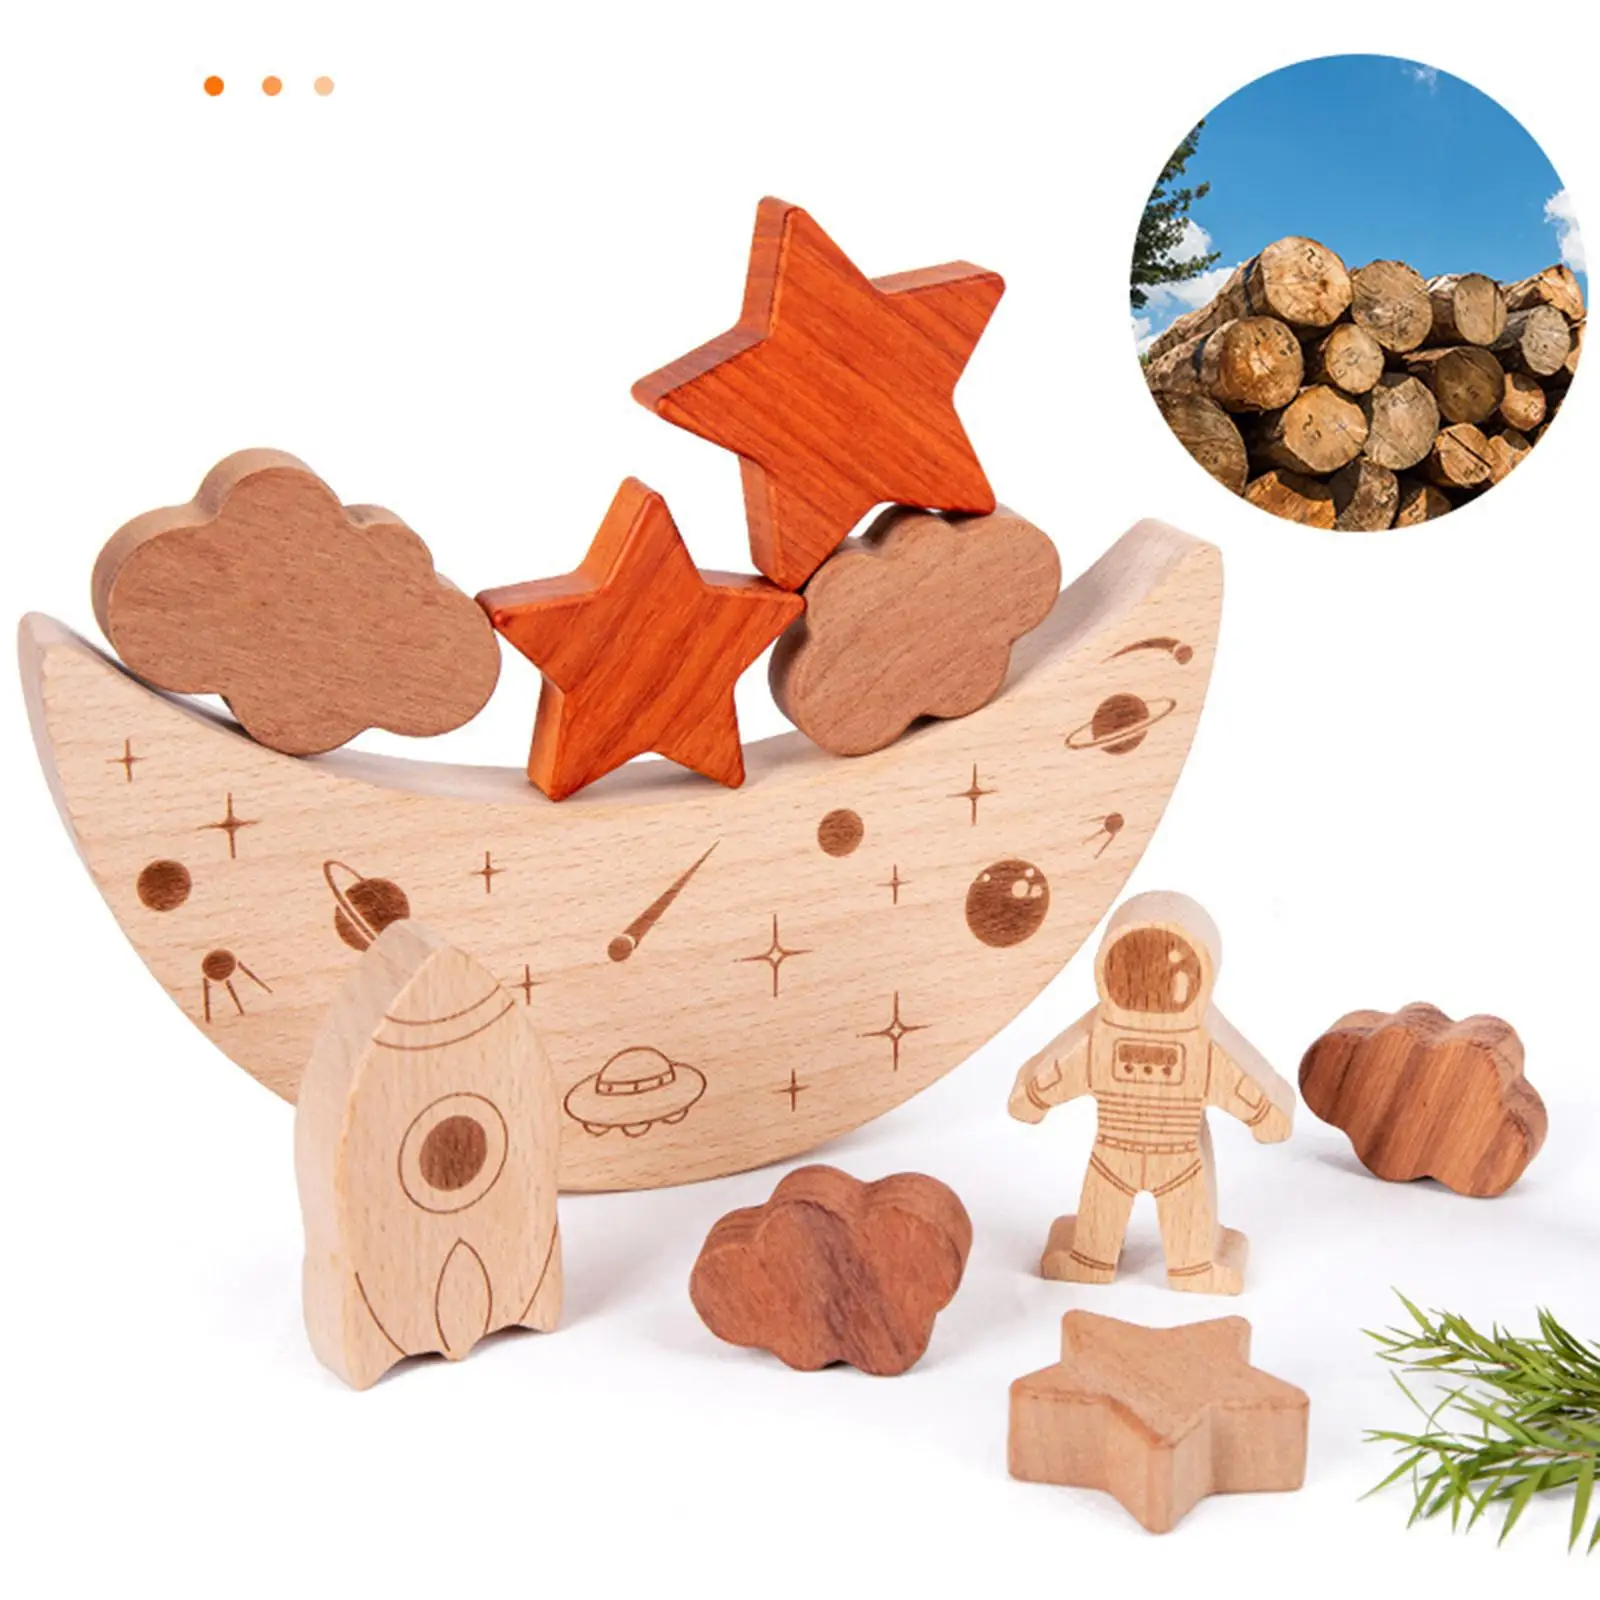 11x Moon Space Wooden Stacking Balance Blocks Baby Building Blocks for Kids Holiday Gifts